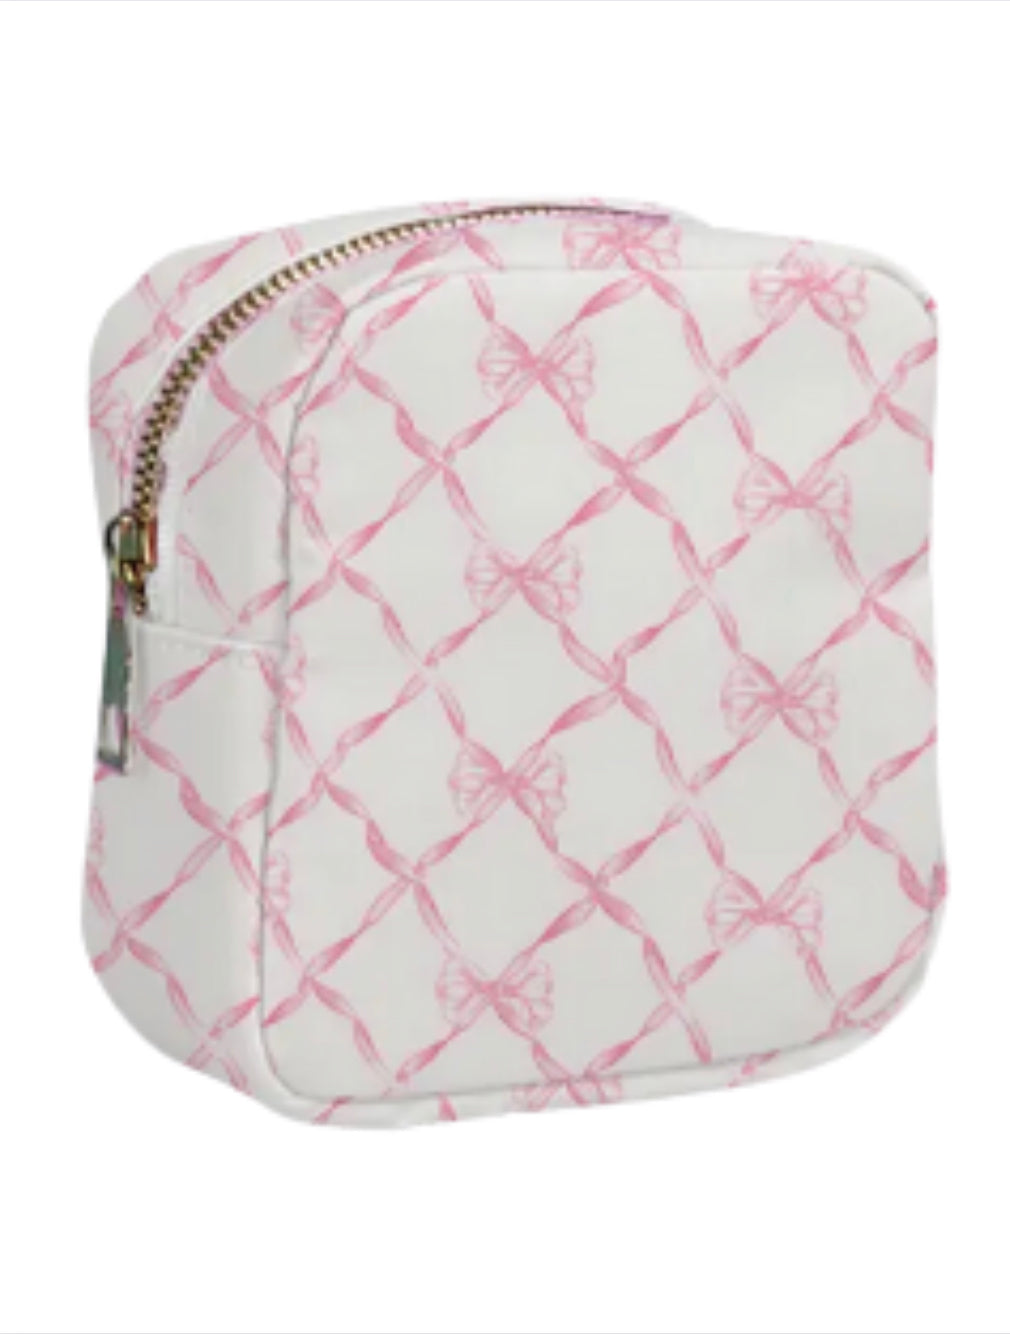 Pink Bow Trellis Pouch